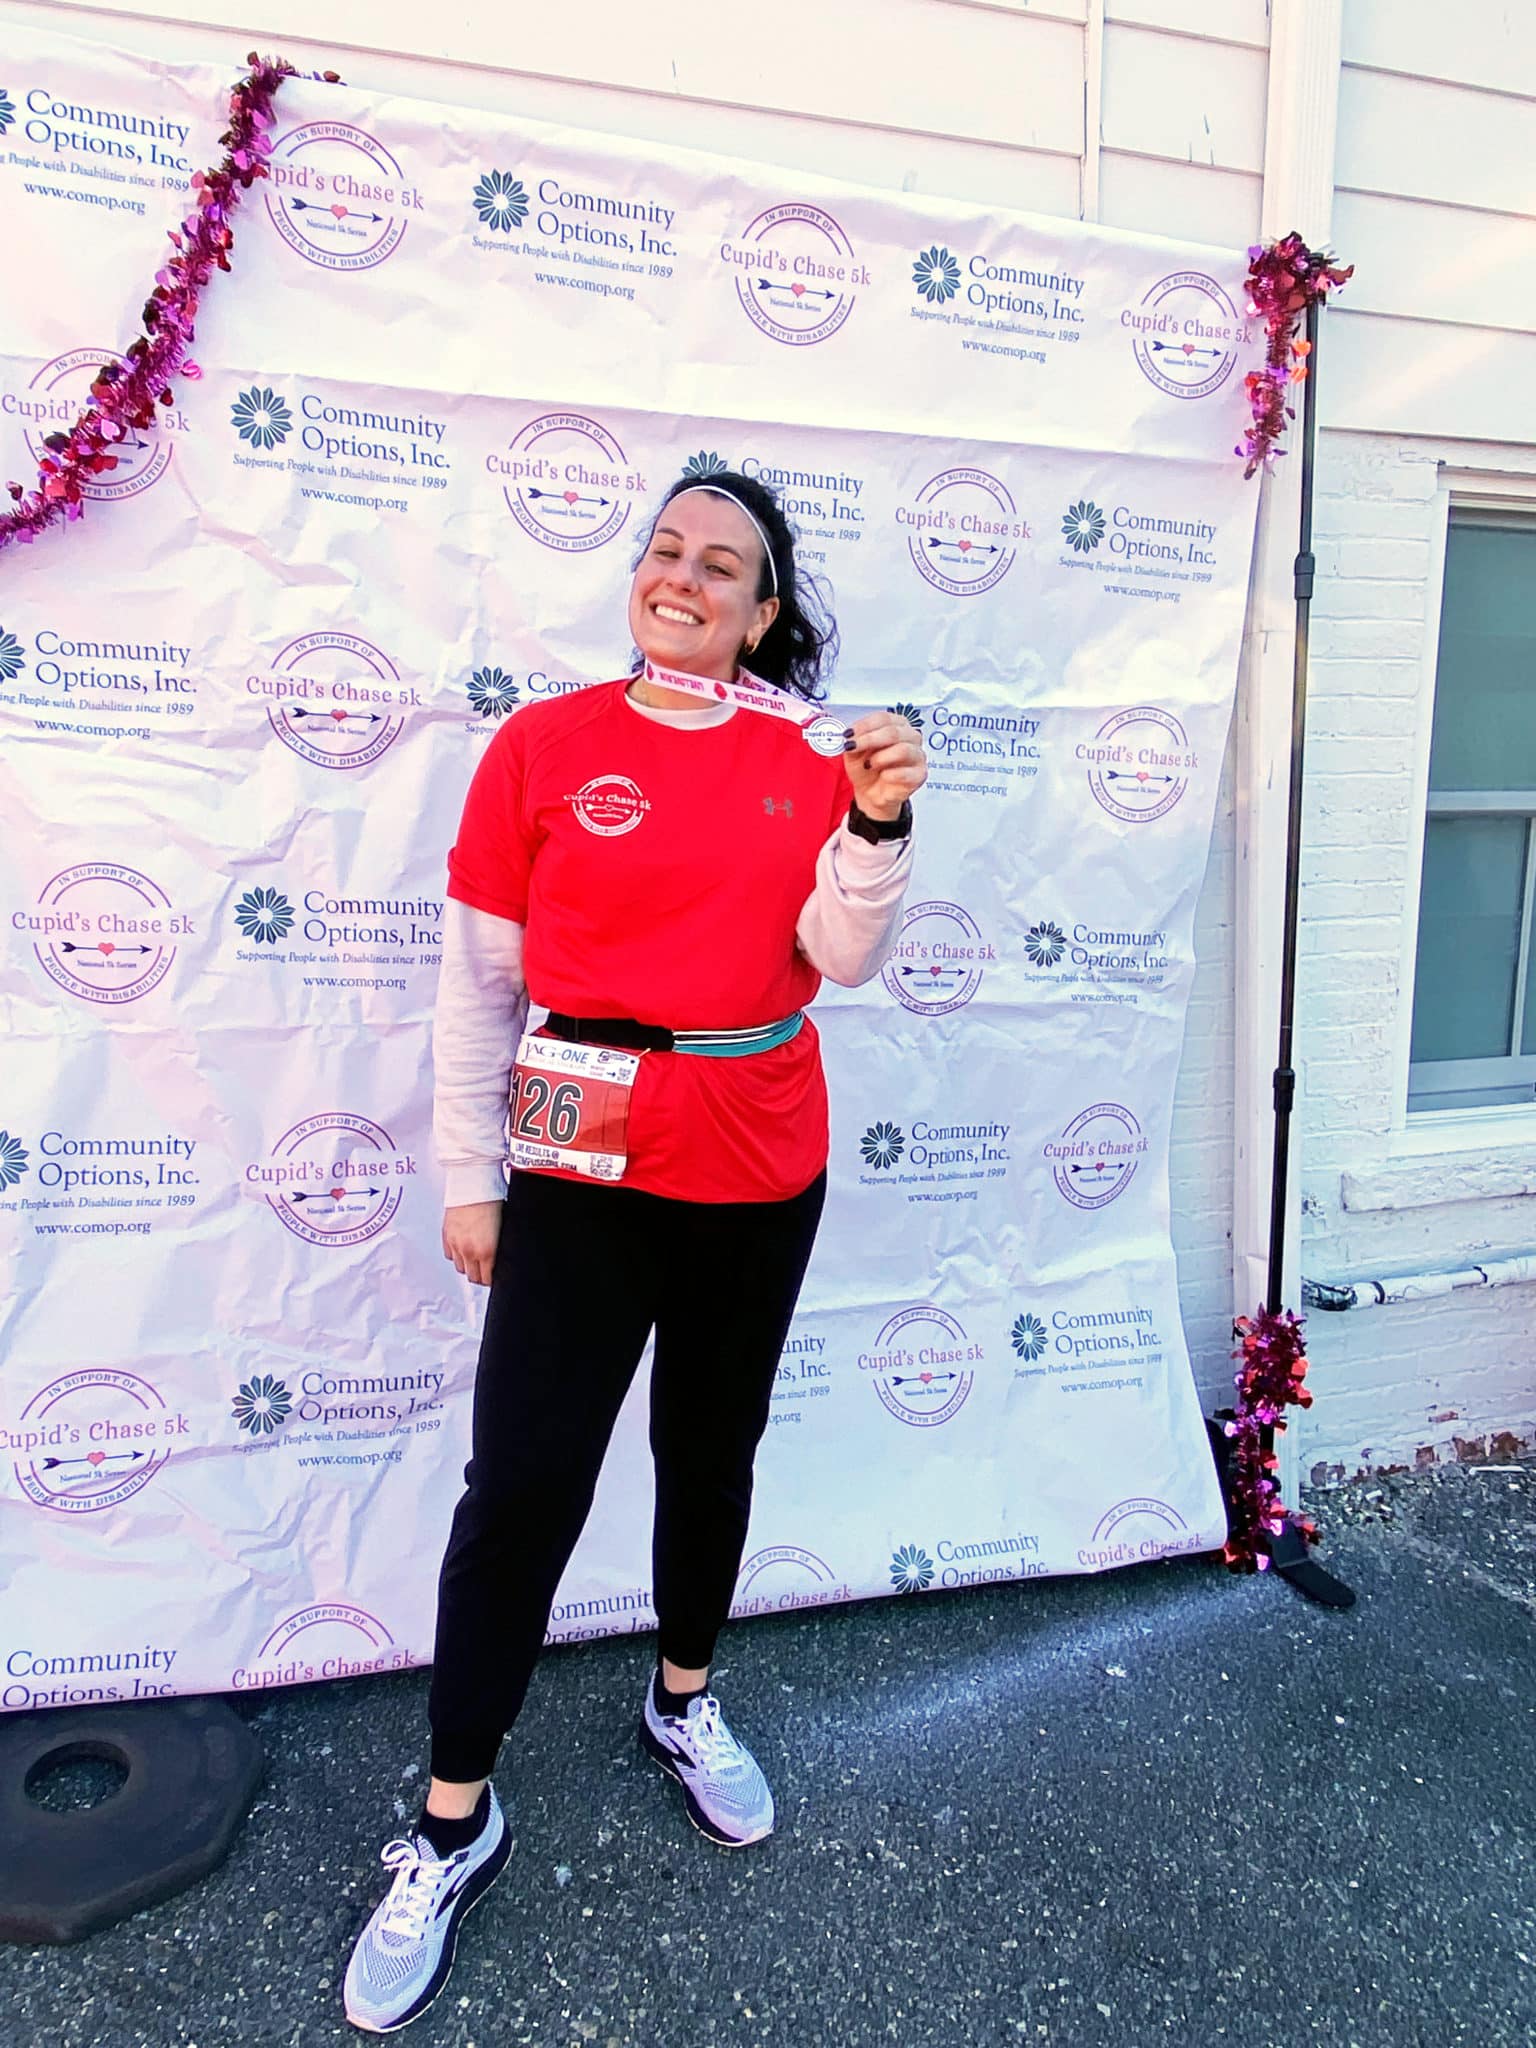 As a runner who enjoys participating in 5K and half marathon races, Samantha Vitone was excited when she came across the Cupid’s Chase Morristown race in 2018.